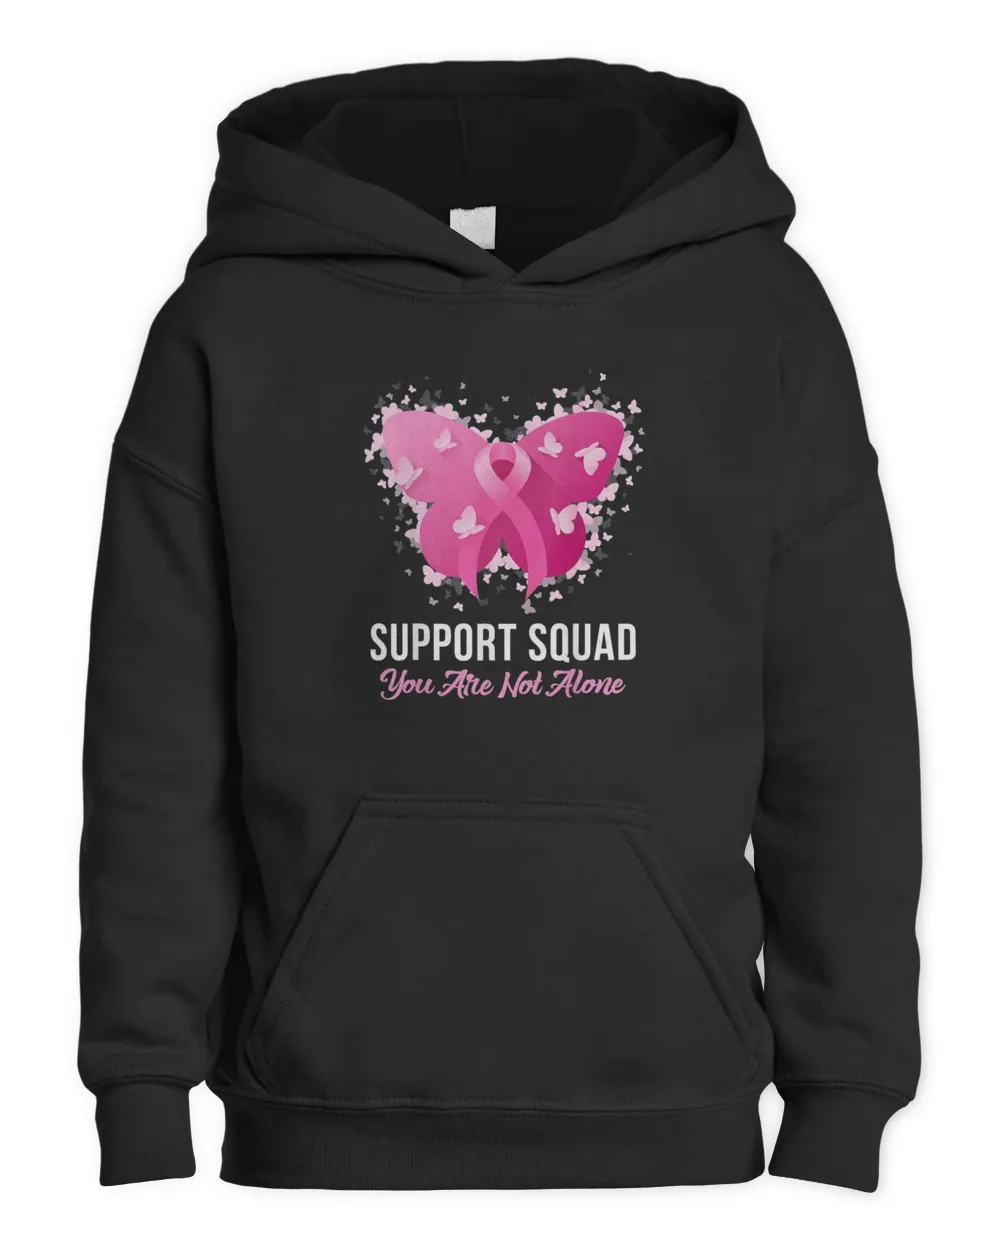 Support Squad Breast Cancer Awareness Pink Ribbon Butterfly T-Shirt